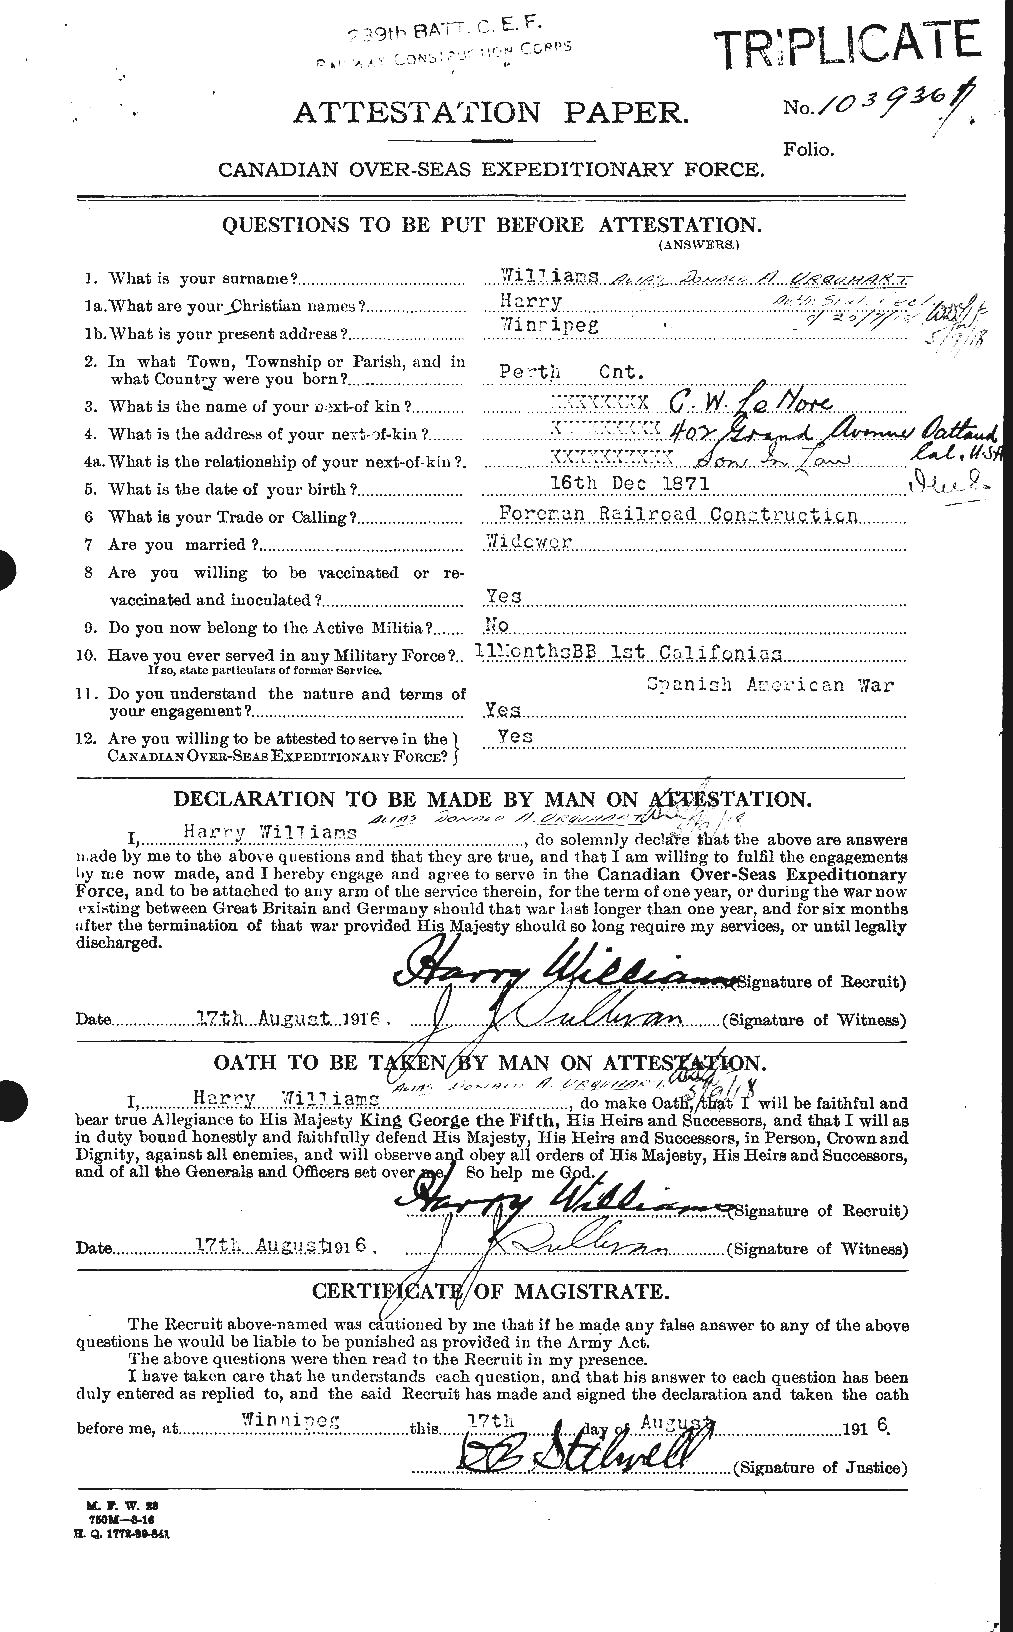 Personnel Records of the First World War - CEF 643314a